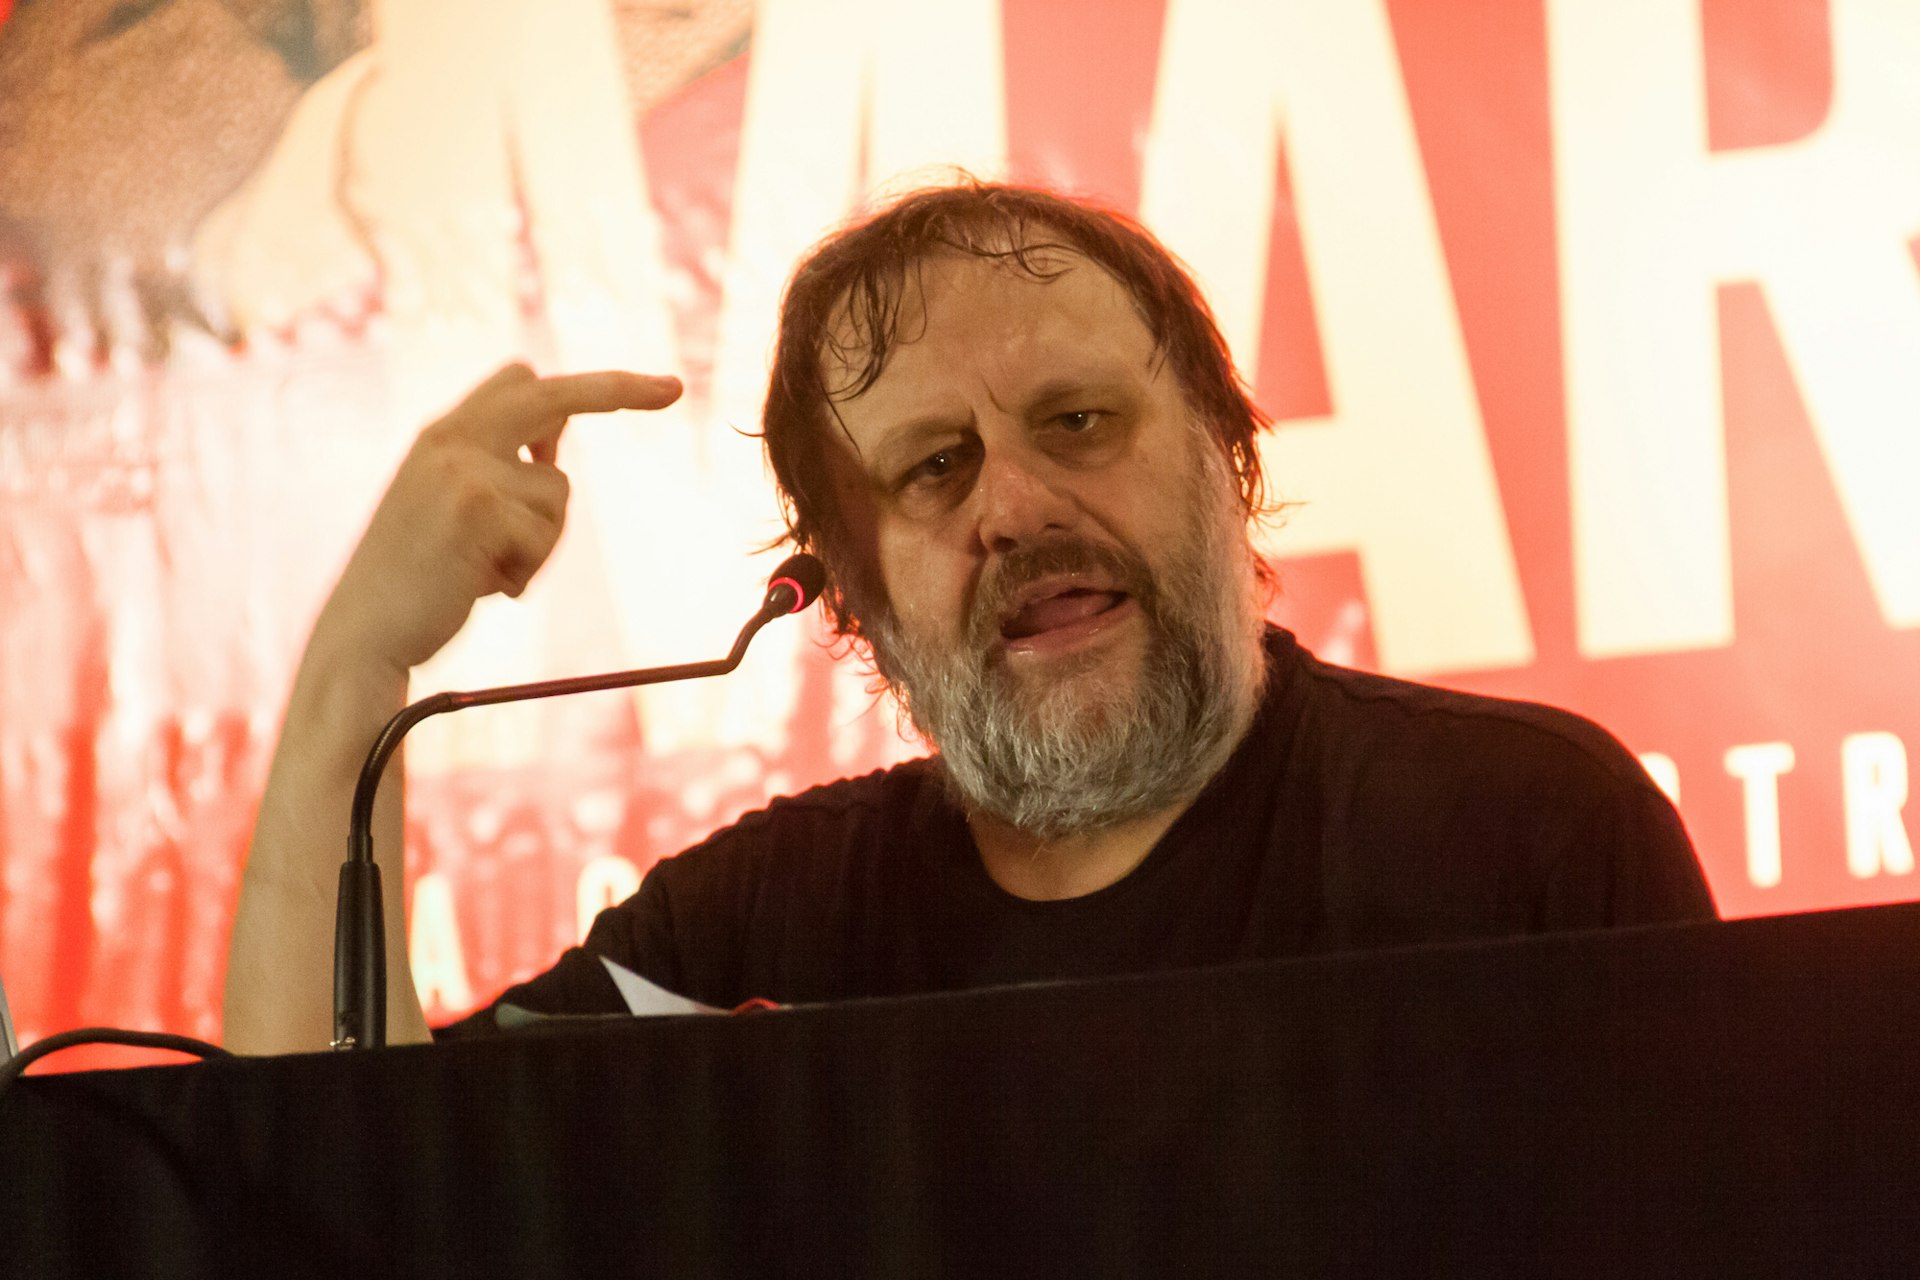 Oi Zizek, stop saying there is no difference between the fascist Le Pen and Macron